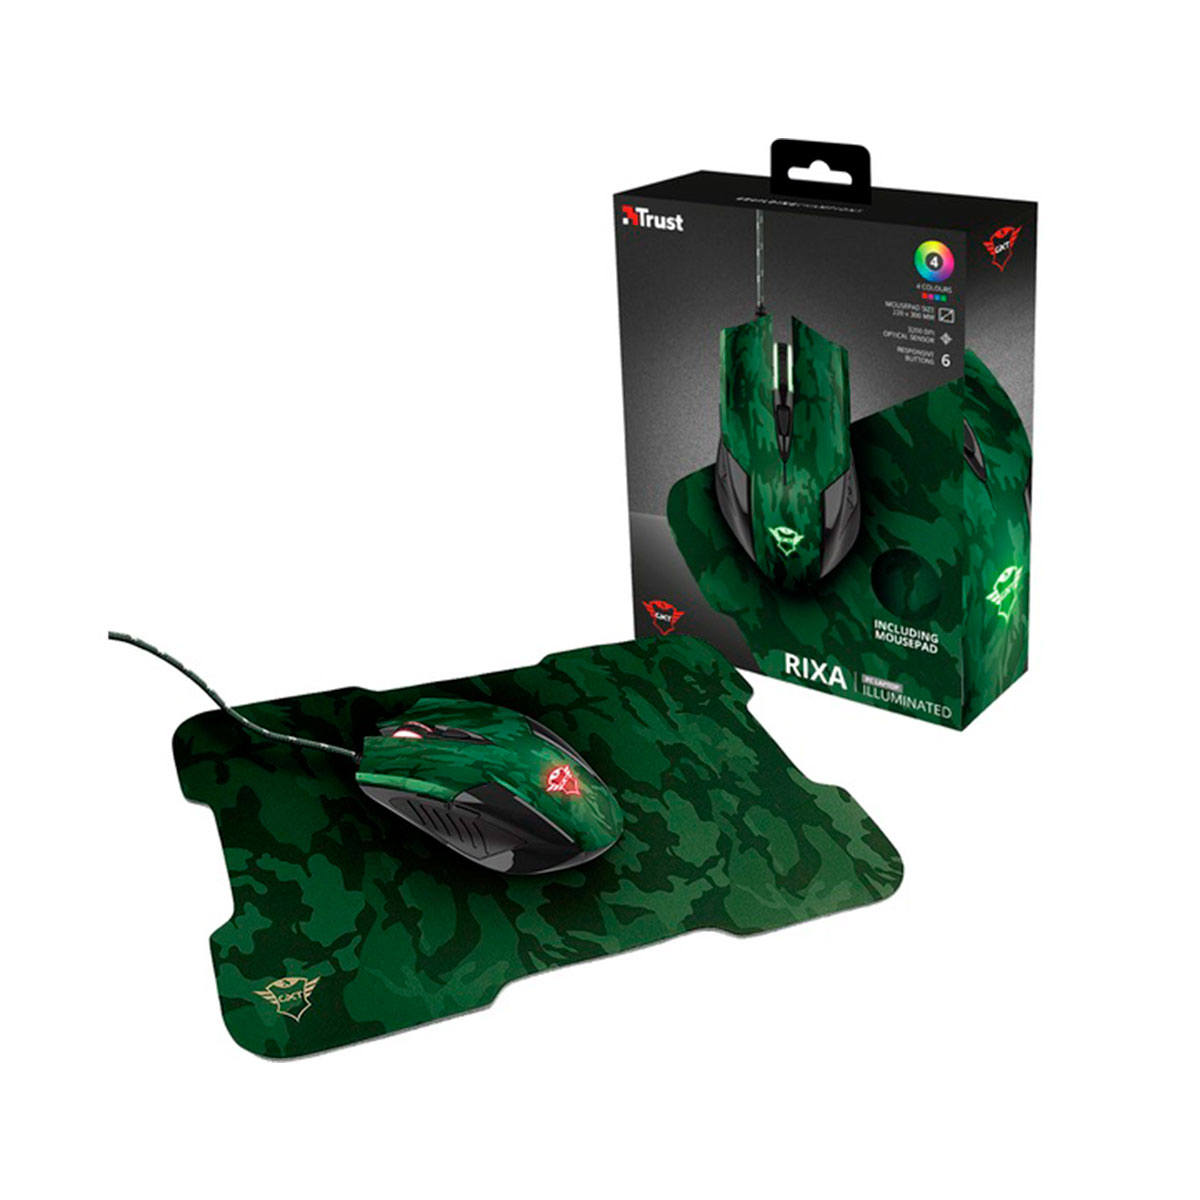 23611 TRUST                                                        | COMBO MOUSE Y MOUSE PAD RIXA CAMUFLADO                                                                                                                                                                                                          